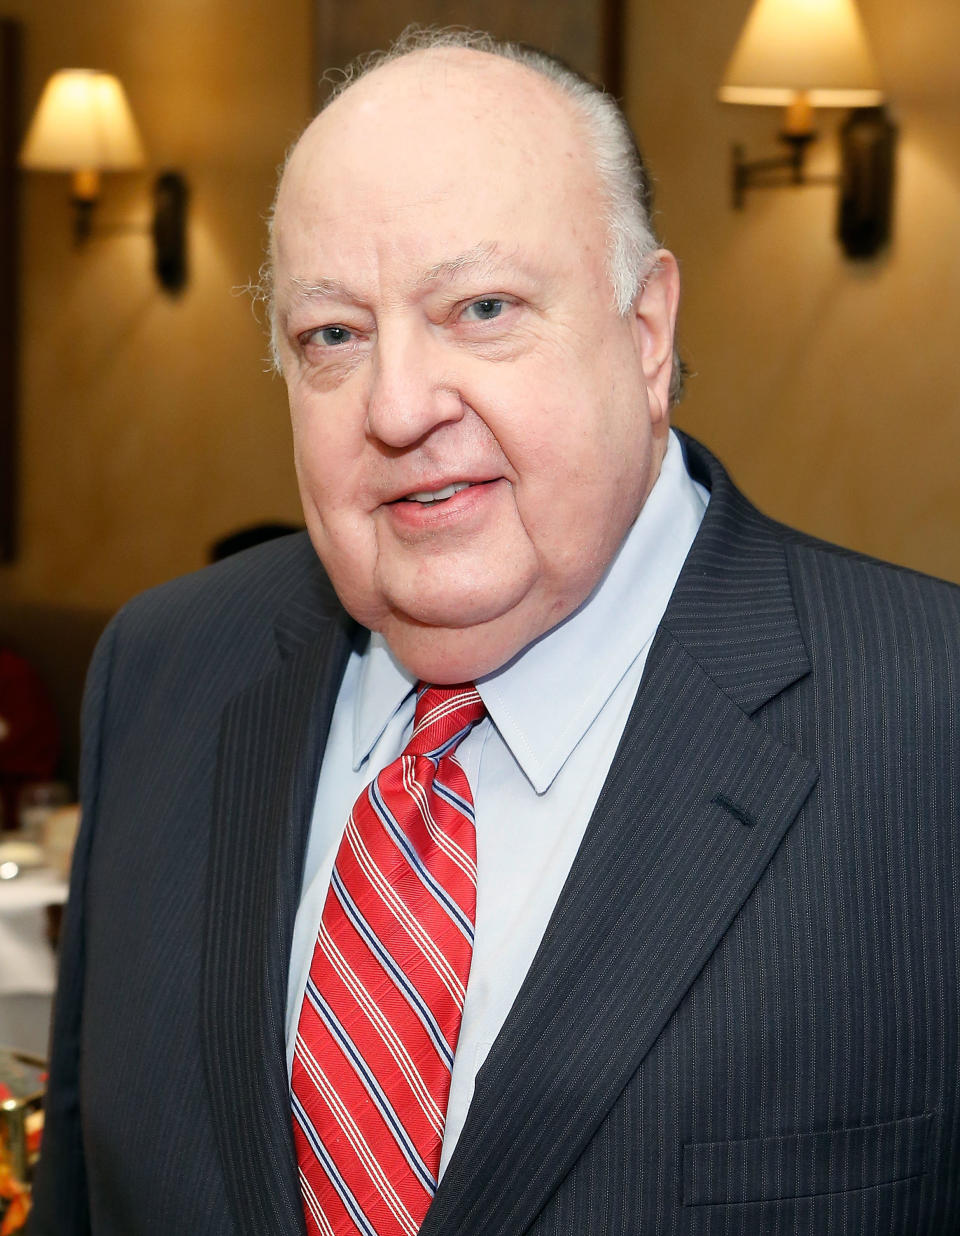 Ailes, the former CEO of Fox News, was <a href="http://www.huffingtonpost.com/entry/roger-ailes-accusers-list_us_57a9fa19e4b06e52746db865">accused by many women</a> of sexual harassment, including former news host Gretchen Carlson (with whom <a href="https://www.washingtonpost.com/lifestyle/style/former-fox-host-gretchen-carlson-settles-sexual-harassment-lawsuit-against-roger-ailes-for-20-million/2016/09/06/f1718310-7434-11e6-be4f-3f42f2e5a49e_story.html" target="_blank">Fox News recently settled</a>). But Trump defended Ailes, <a href="http://www.usnews.com/opinion/articles/2016-08-04/donald-trumps-ugly-defense-of-roger-ailes-alleged-sexual-harassment" target="_blank">telling "Meet the Press</a>":&nbsp;"I can tell you that some of the women that are complaining, I know how much he's helped them."